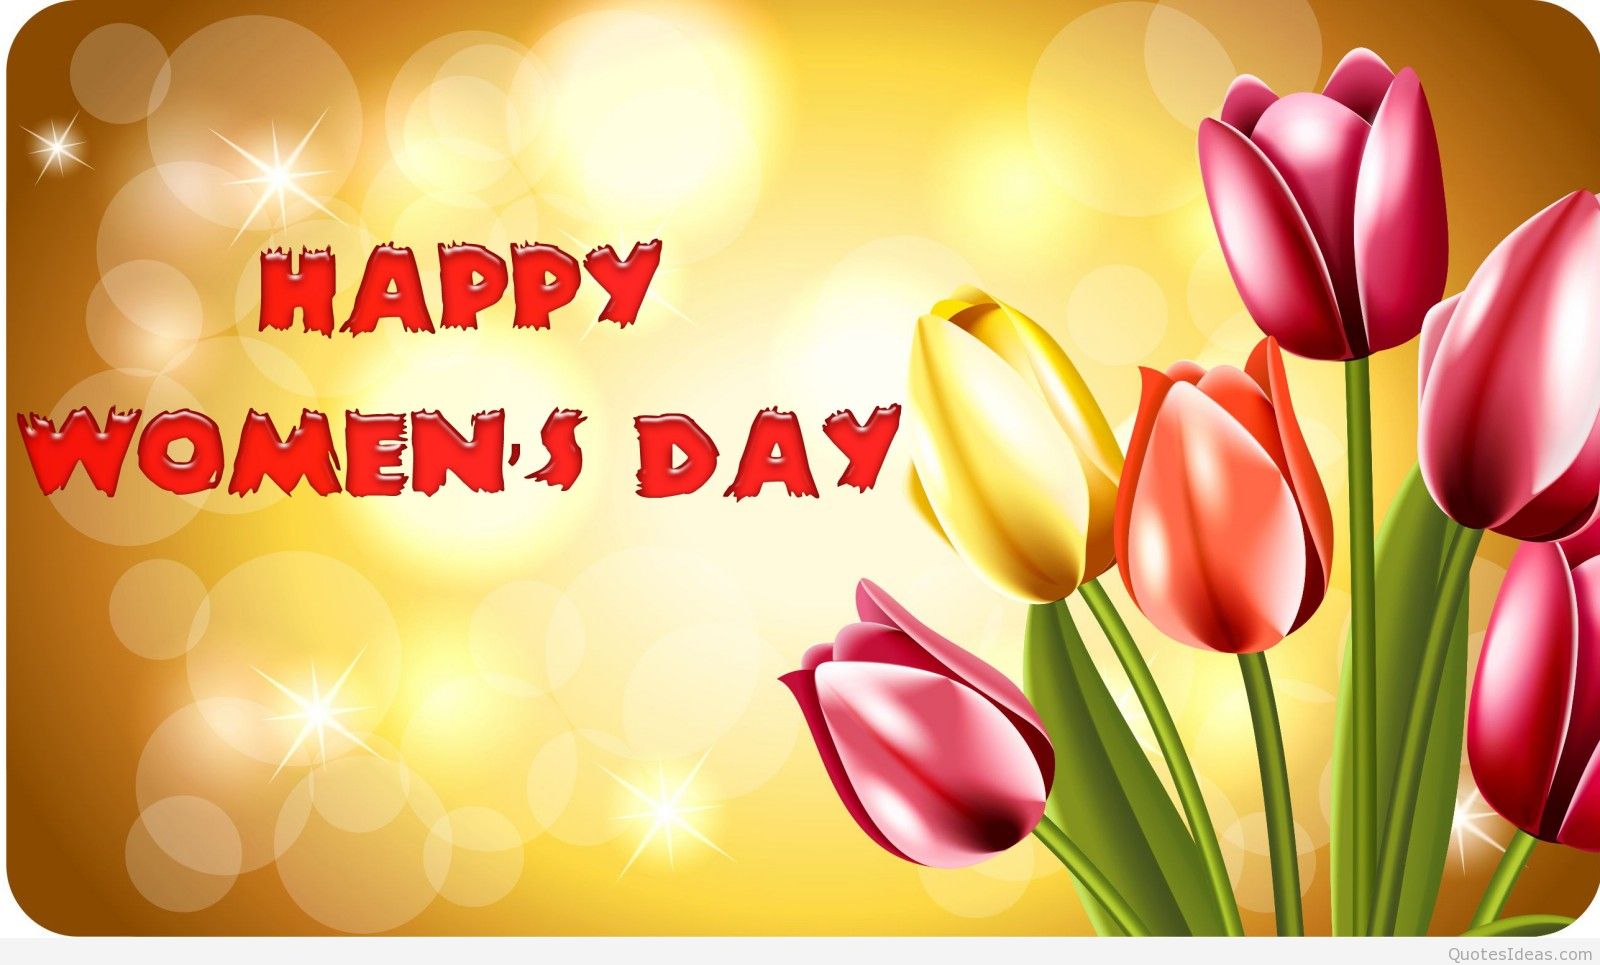 Women's Day HD Wallpapers, photos and pictures